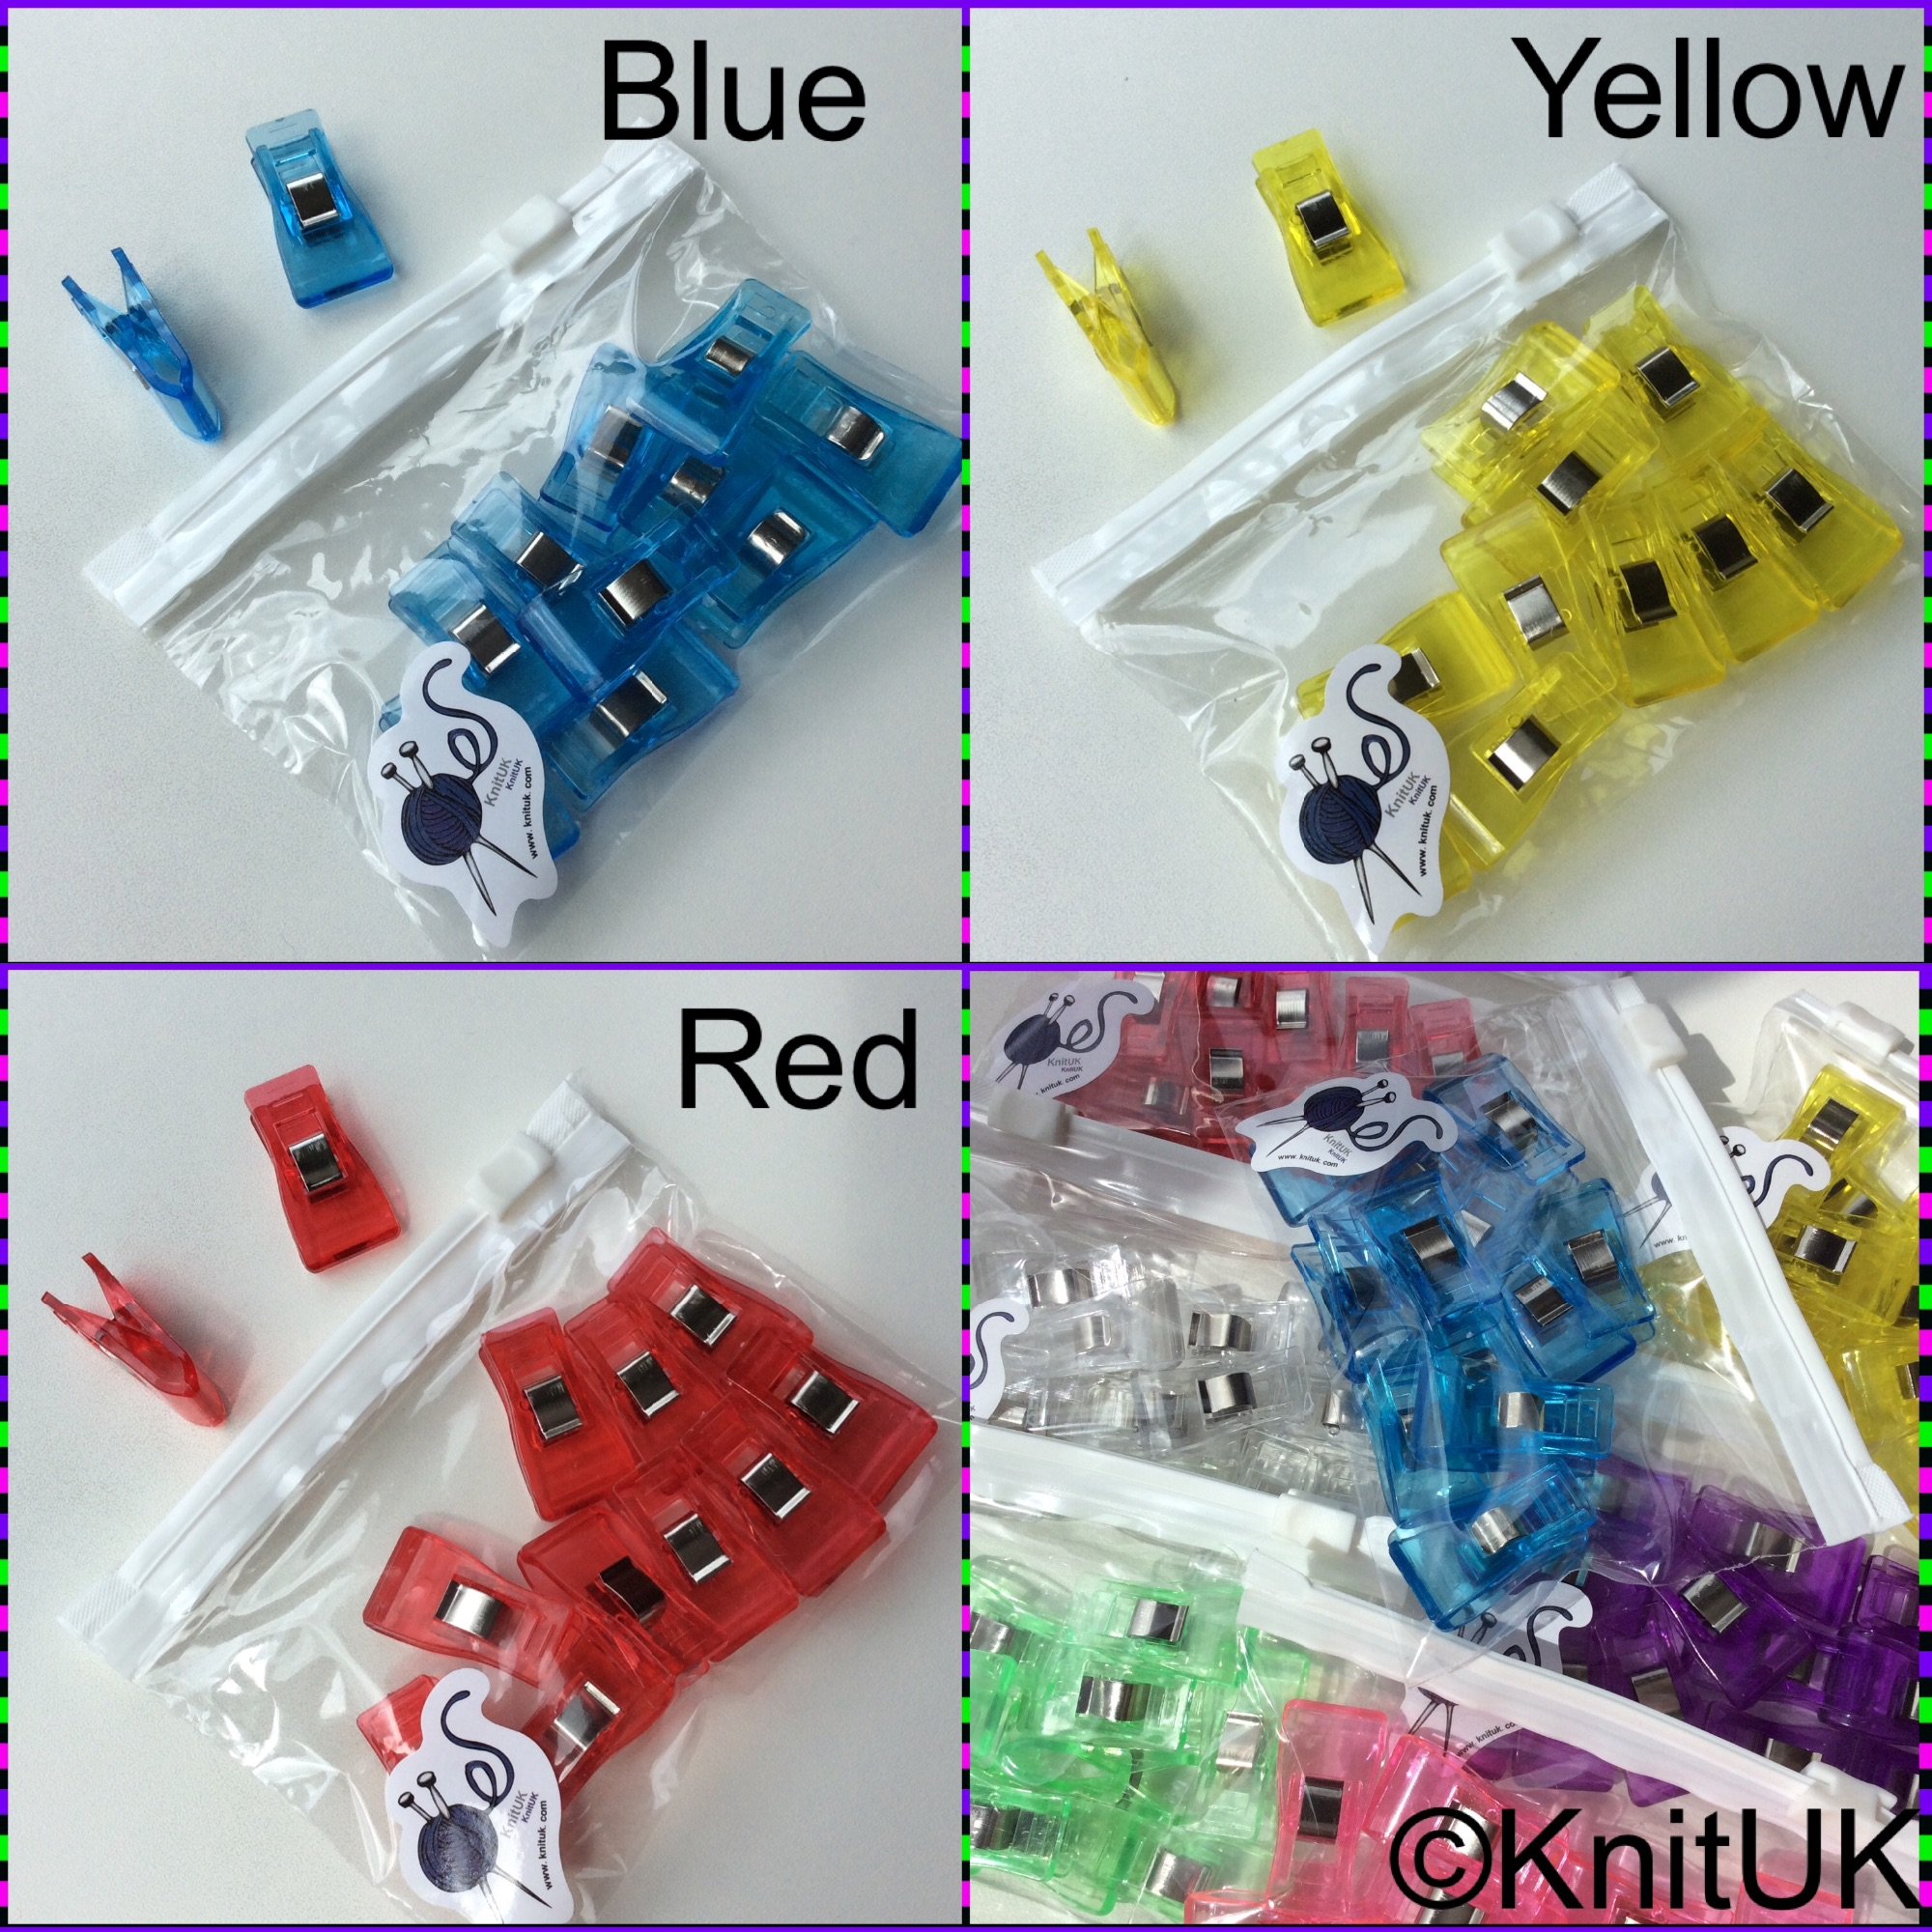 Knituk Sewing quilting clips medium blue yellow red all bags